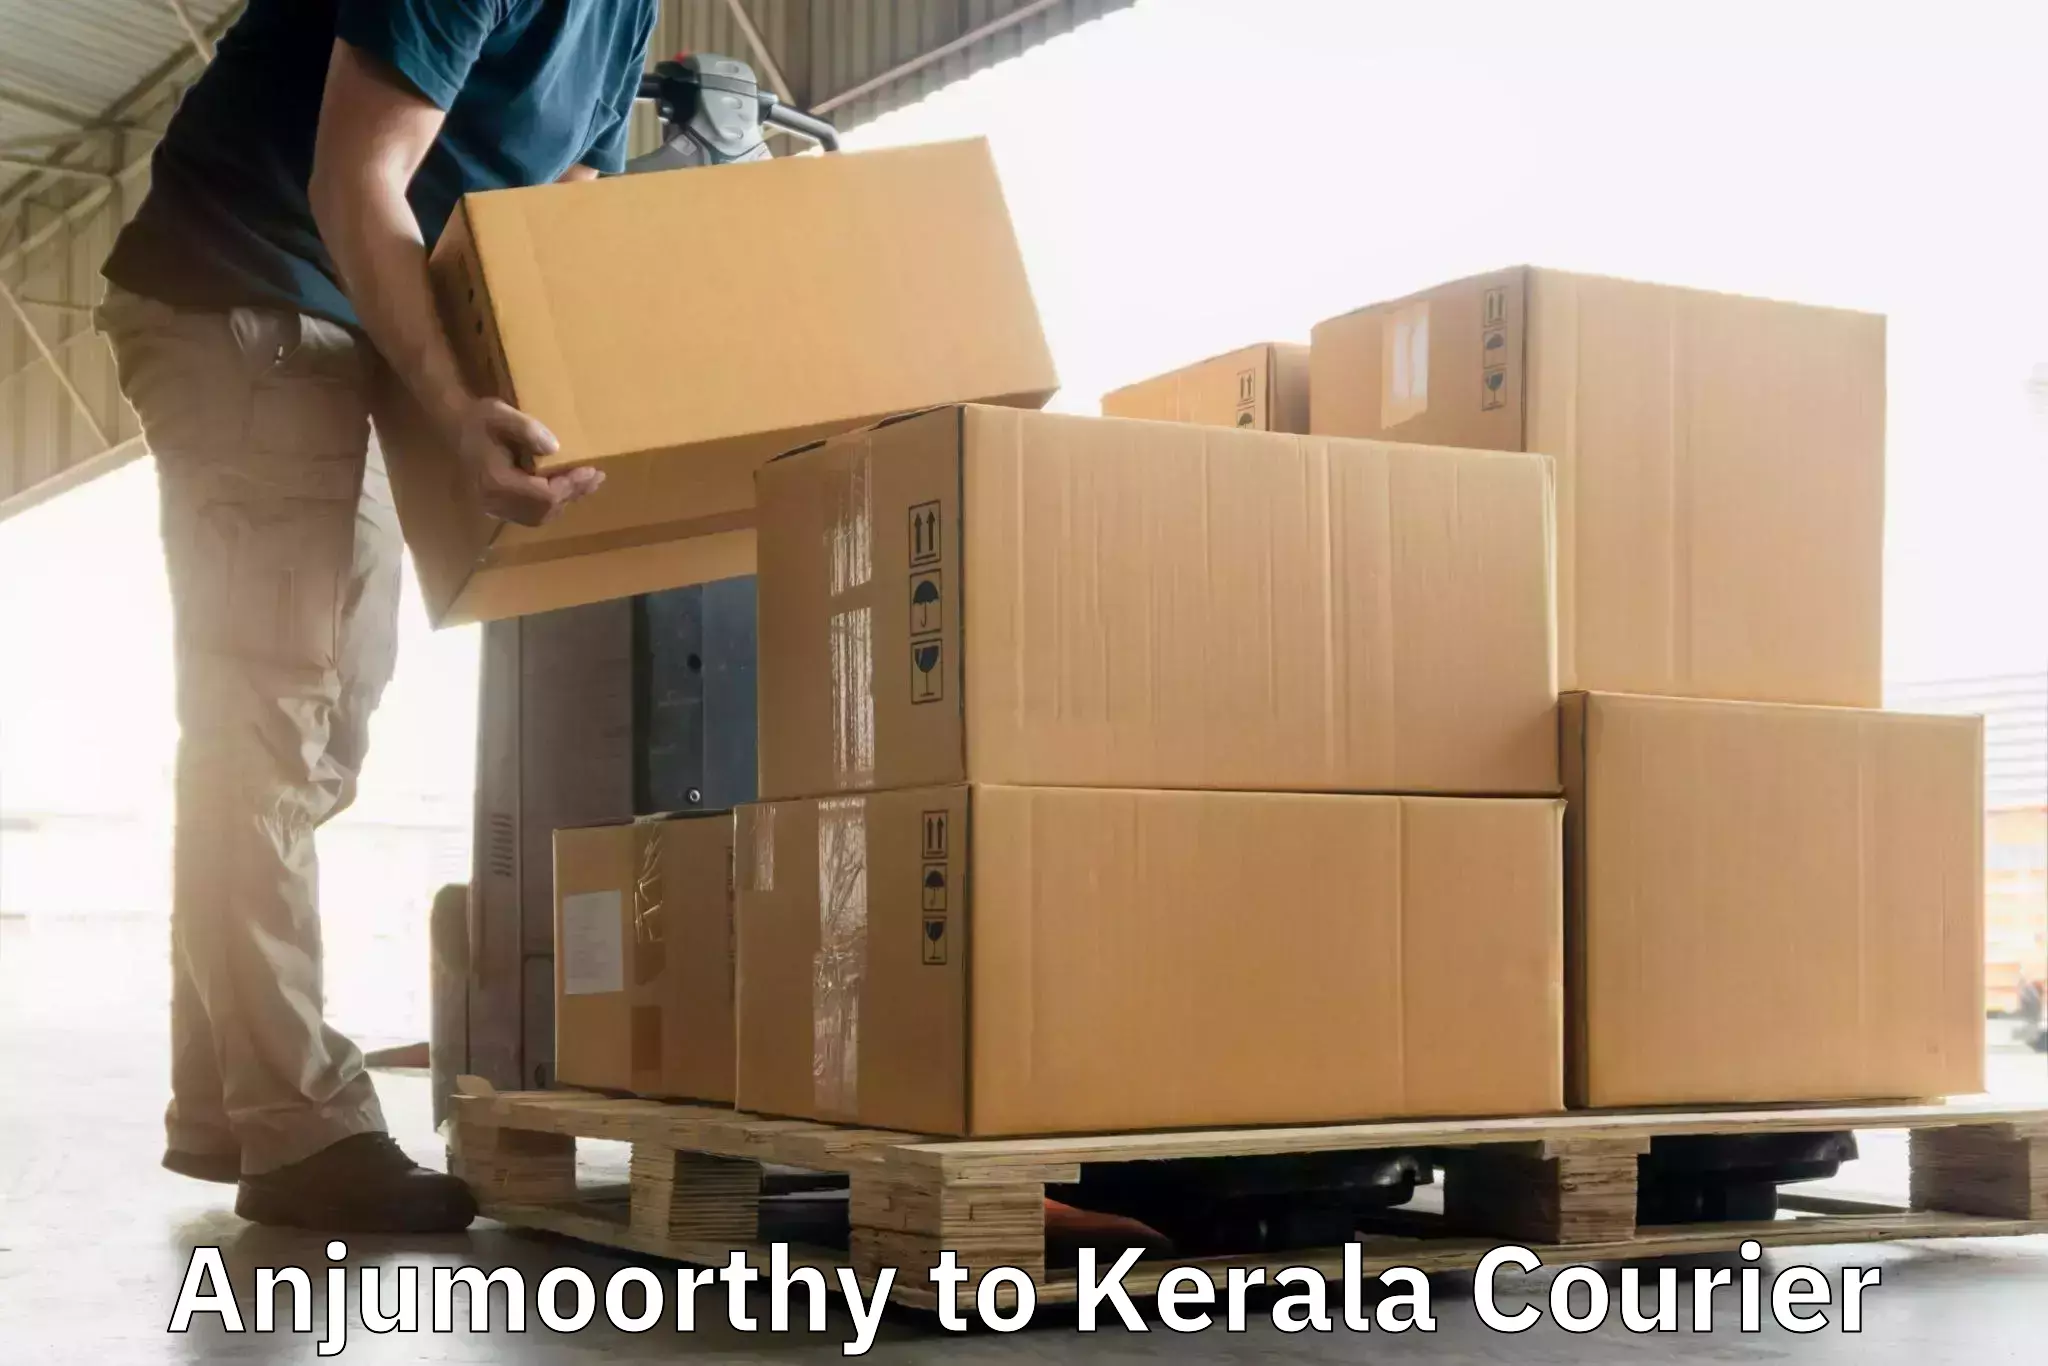 Reliable freight solutions Anjumoorthy to Rajamudy